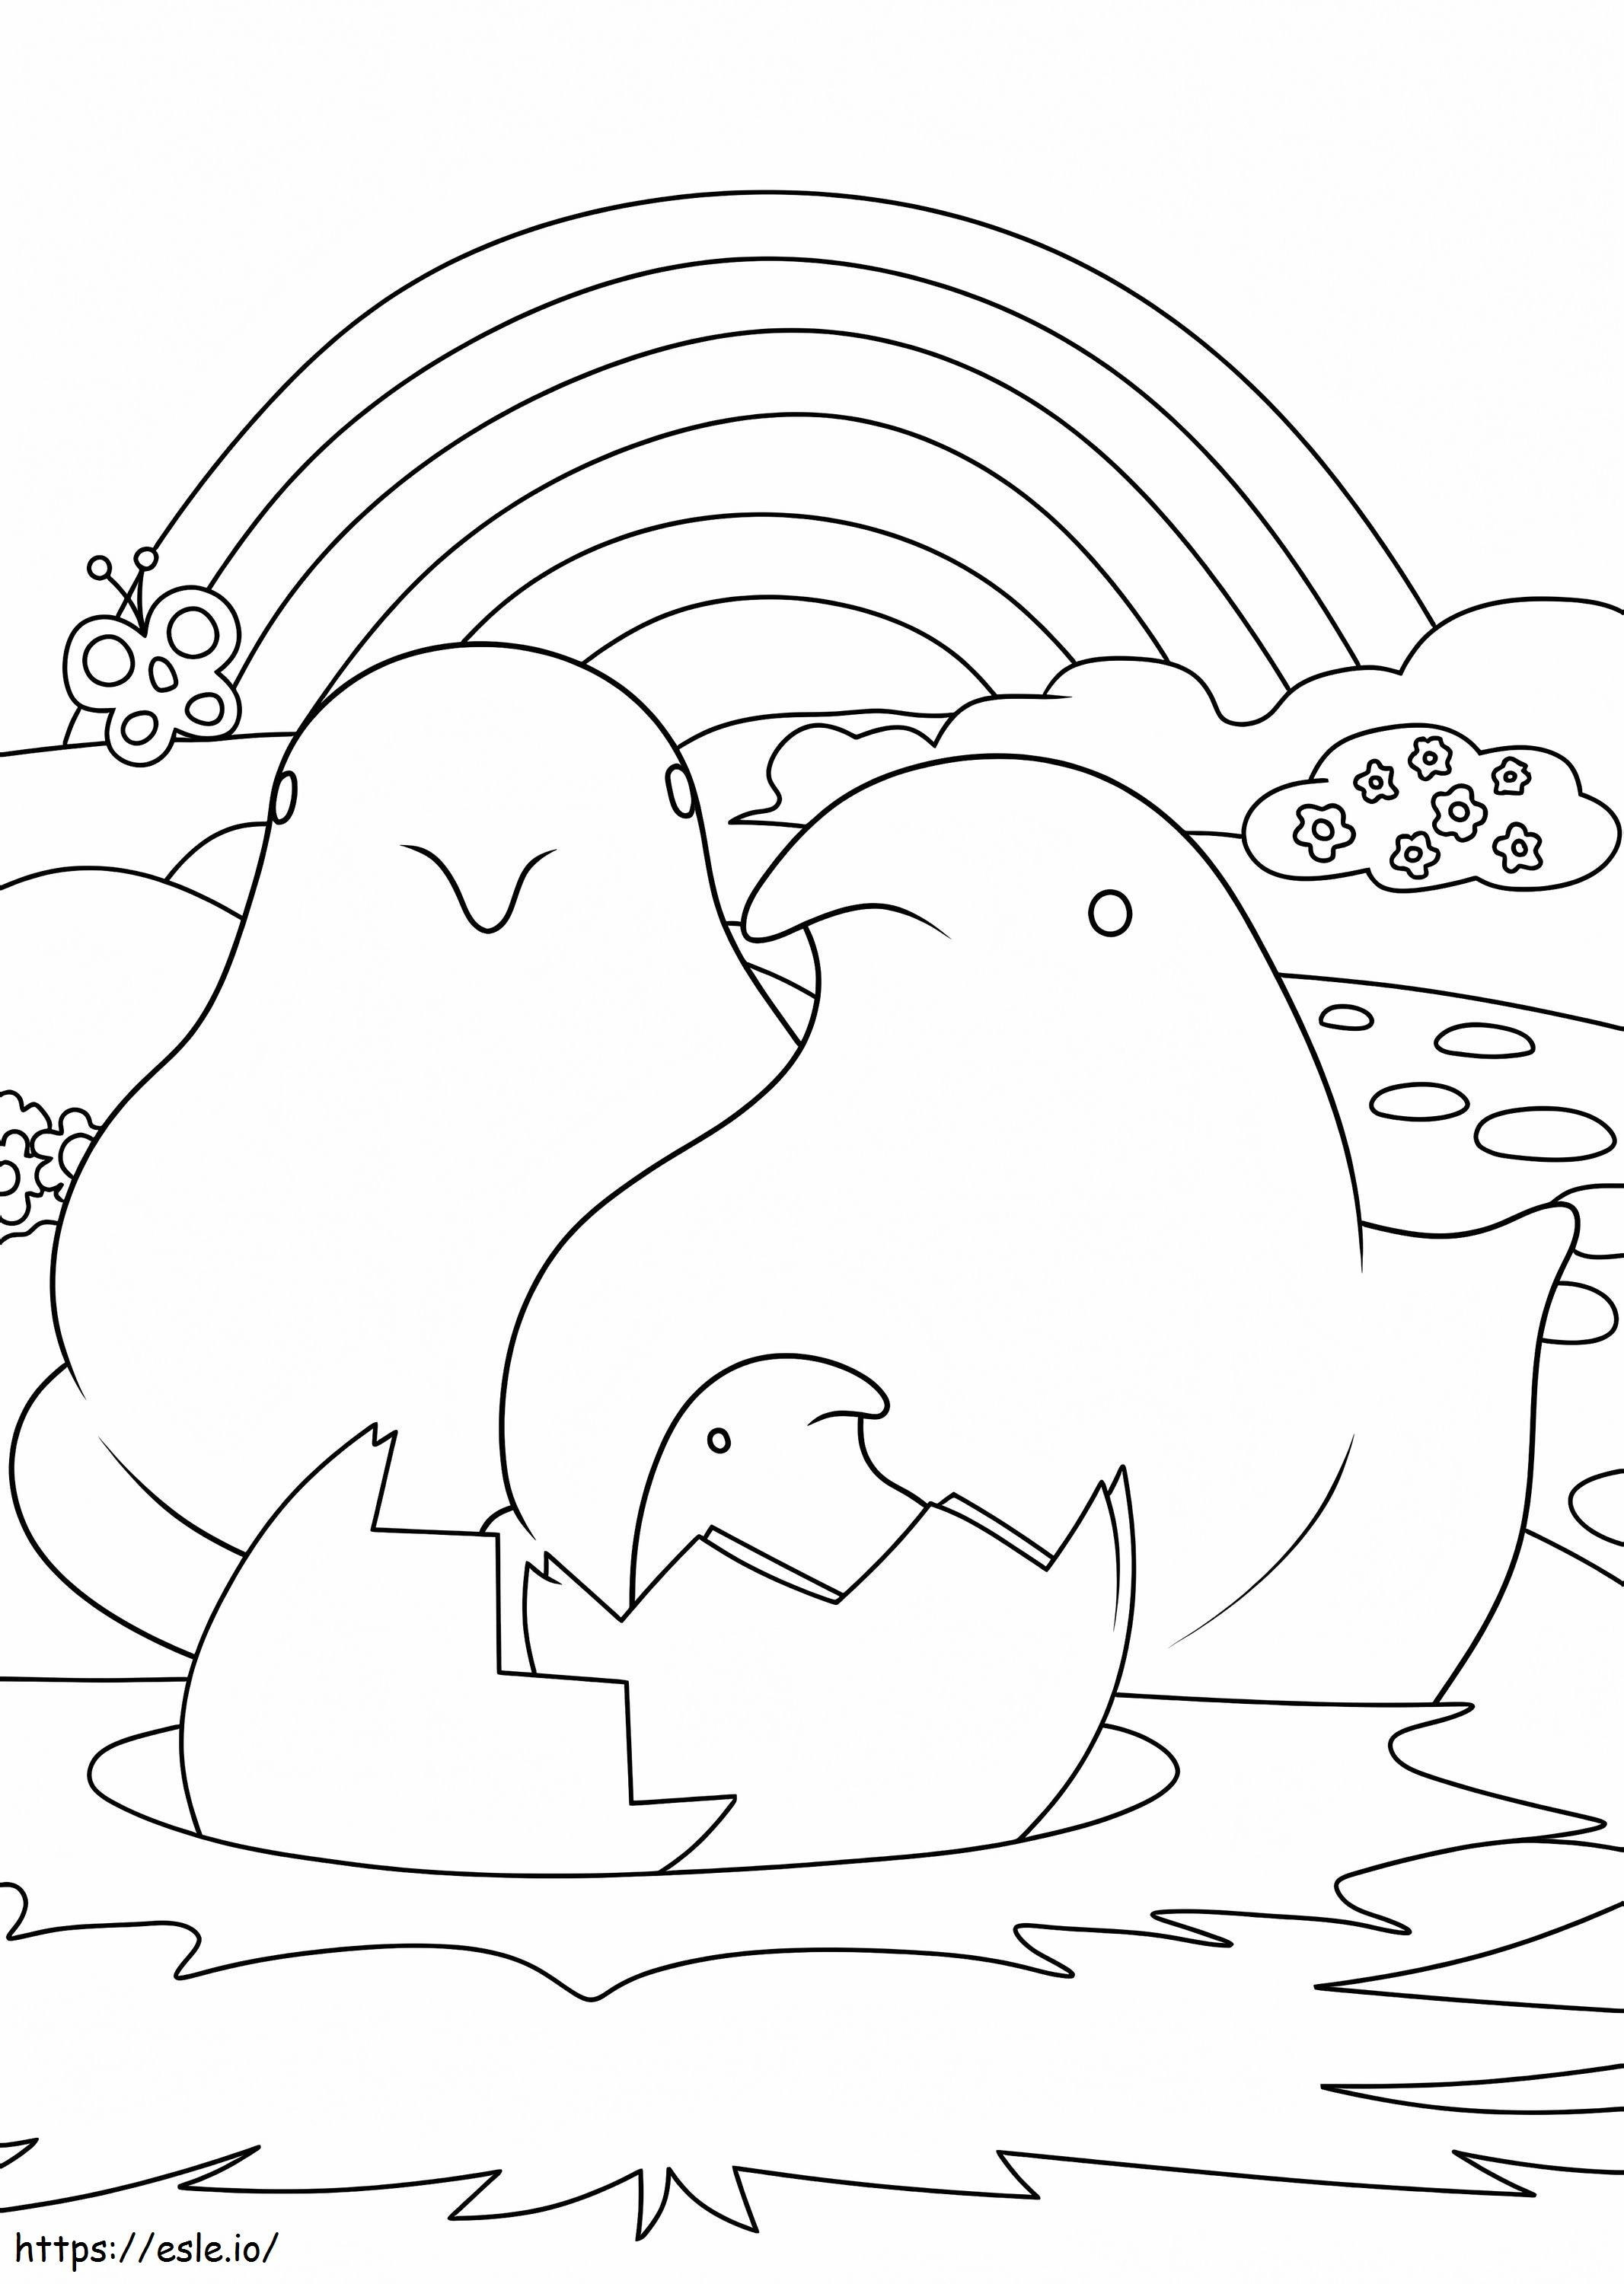 Marshmallow Peeps Chicks Family coloring page